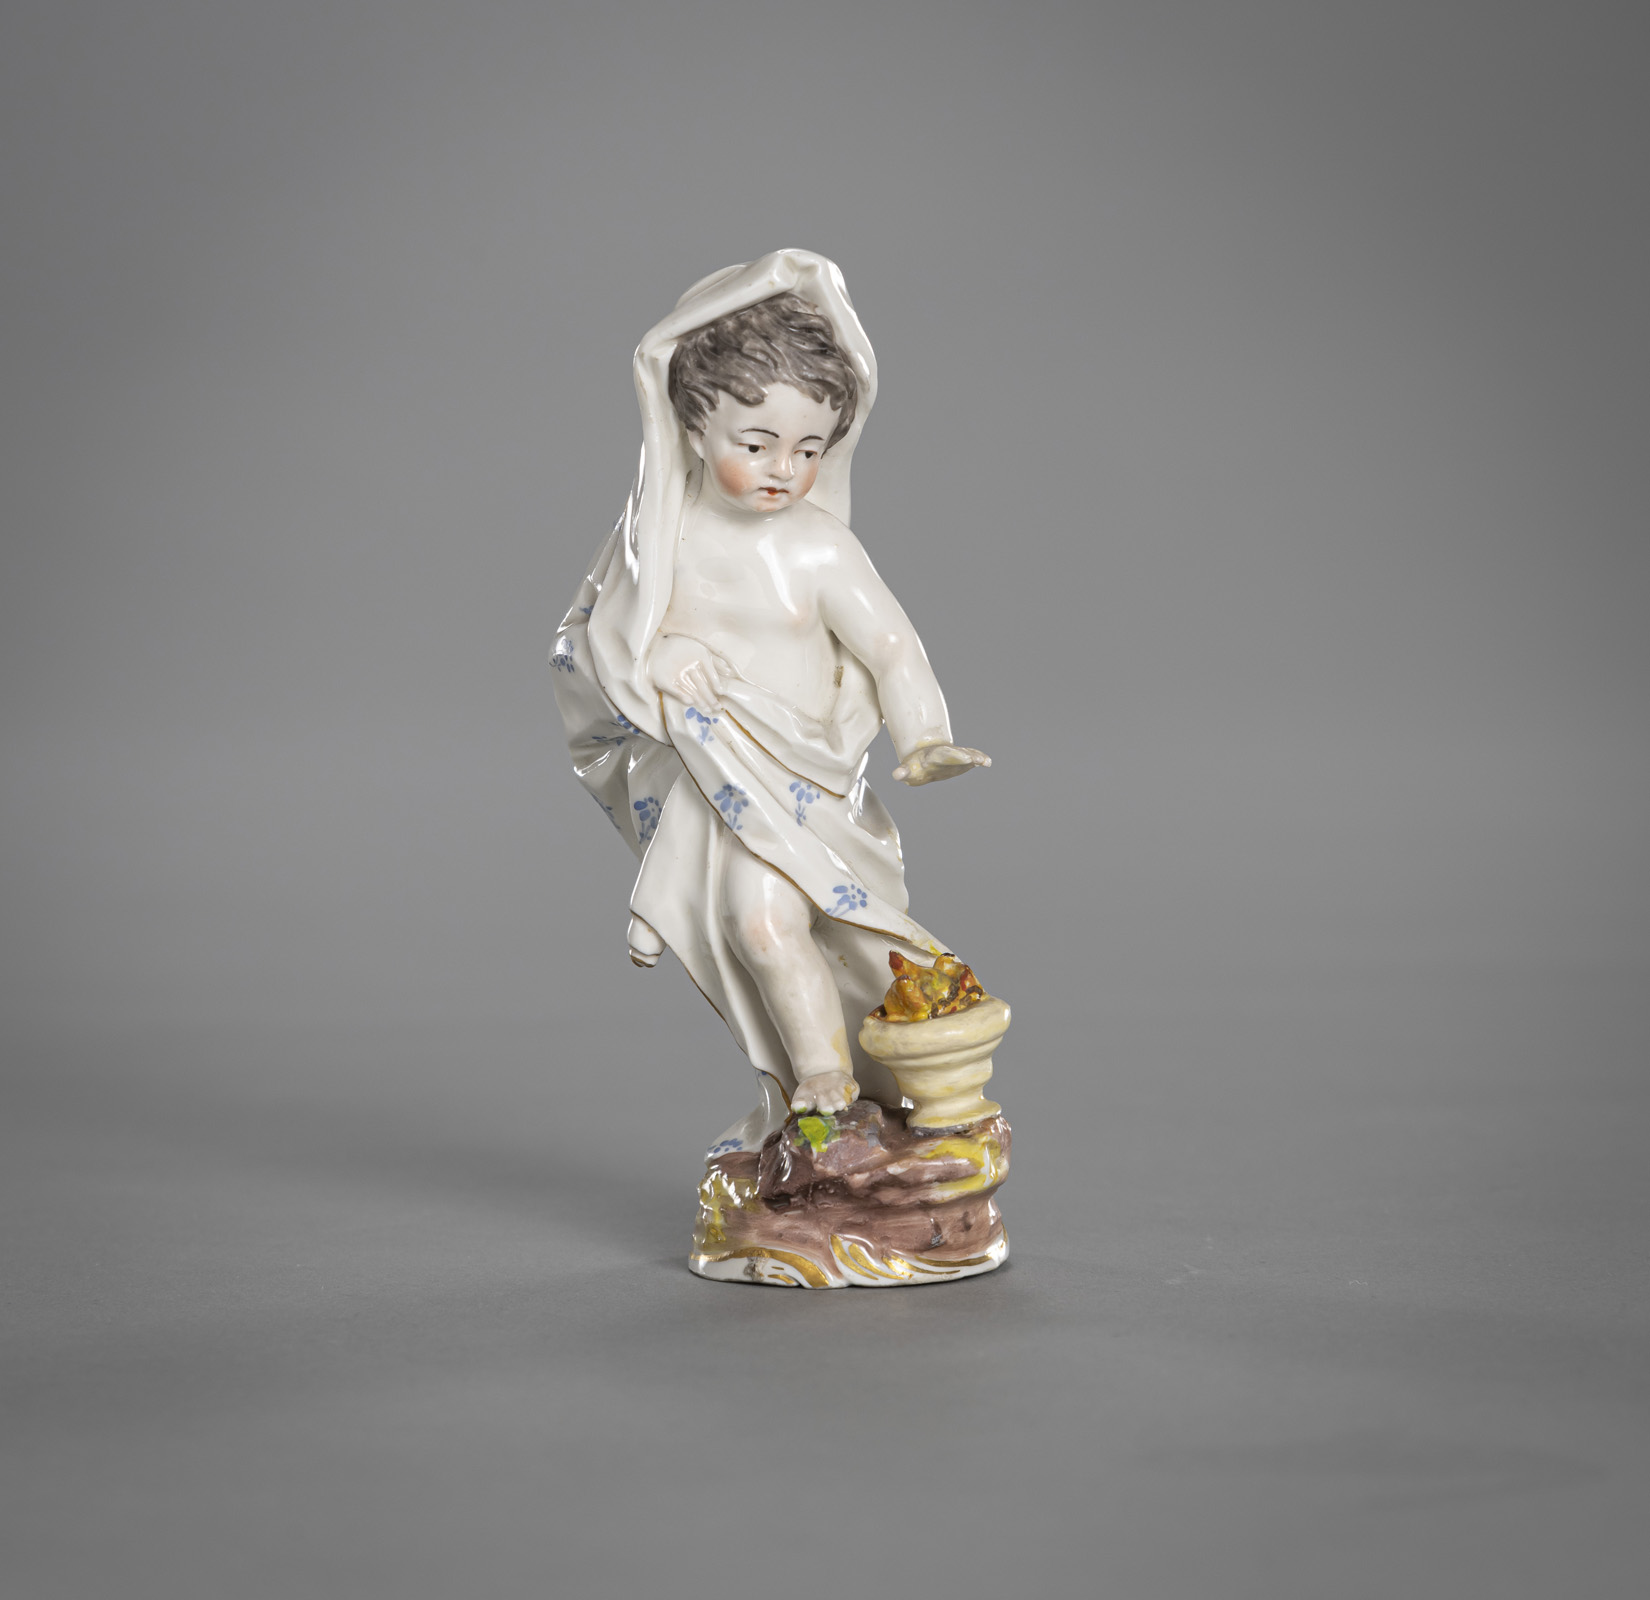 A FIGURINE OF A PUTTO DEPICTING THE WINTER